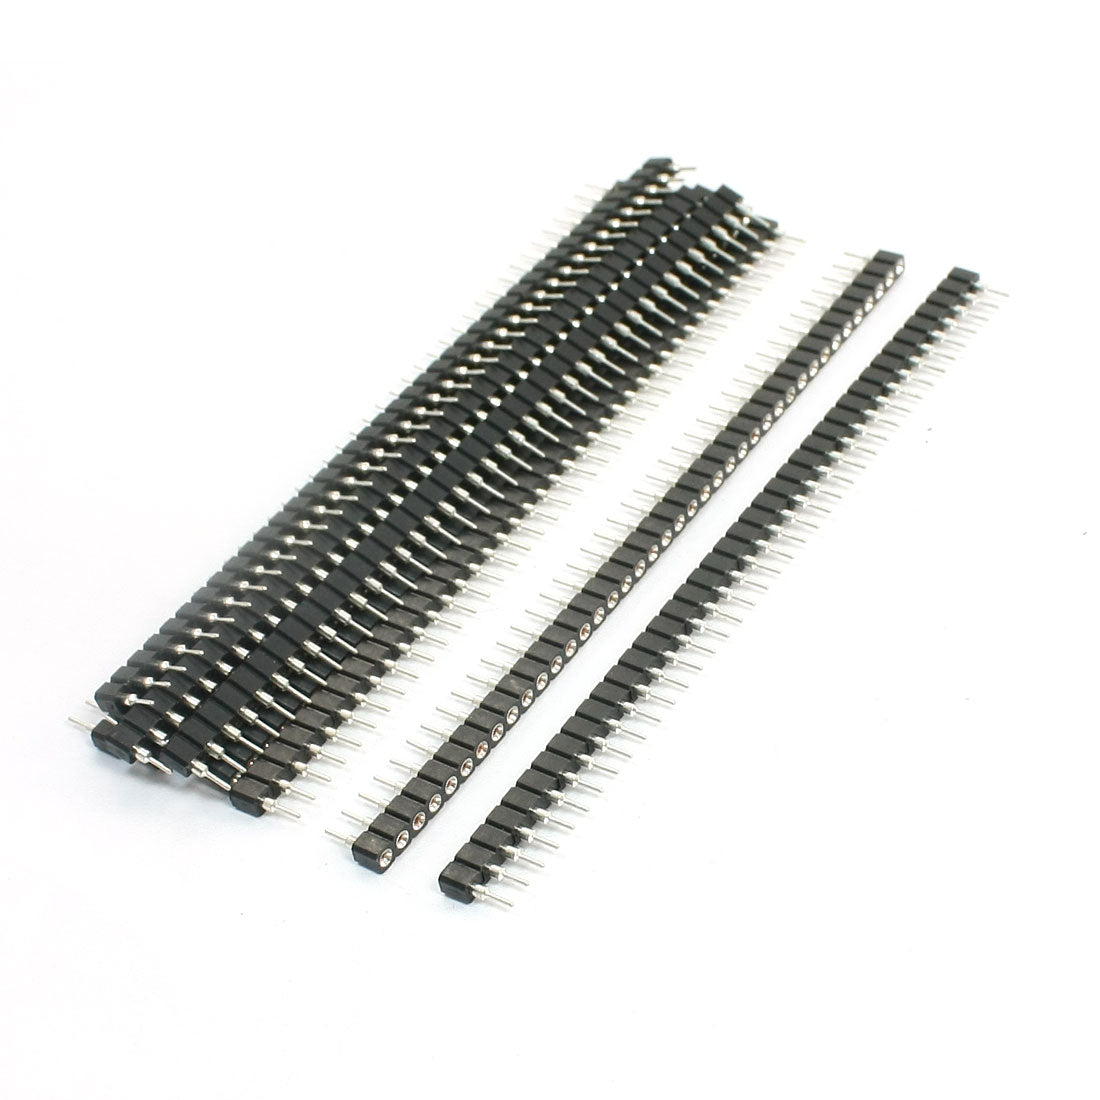 uxcell Uxcell 10pcs 2.54mm Pitch Straight Single Row Female Header Connector 40Pins